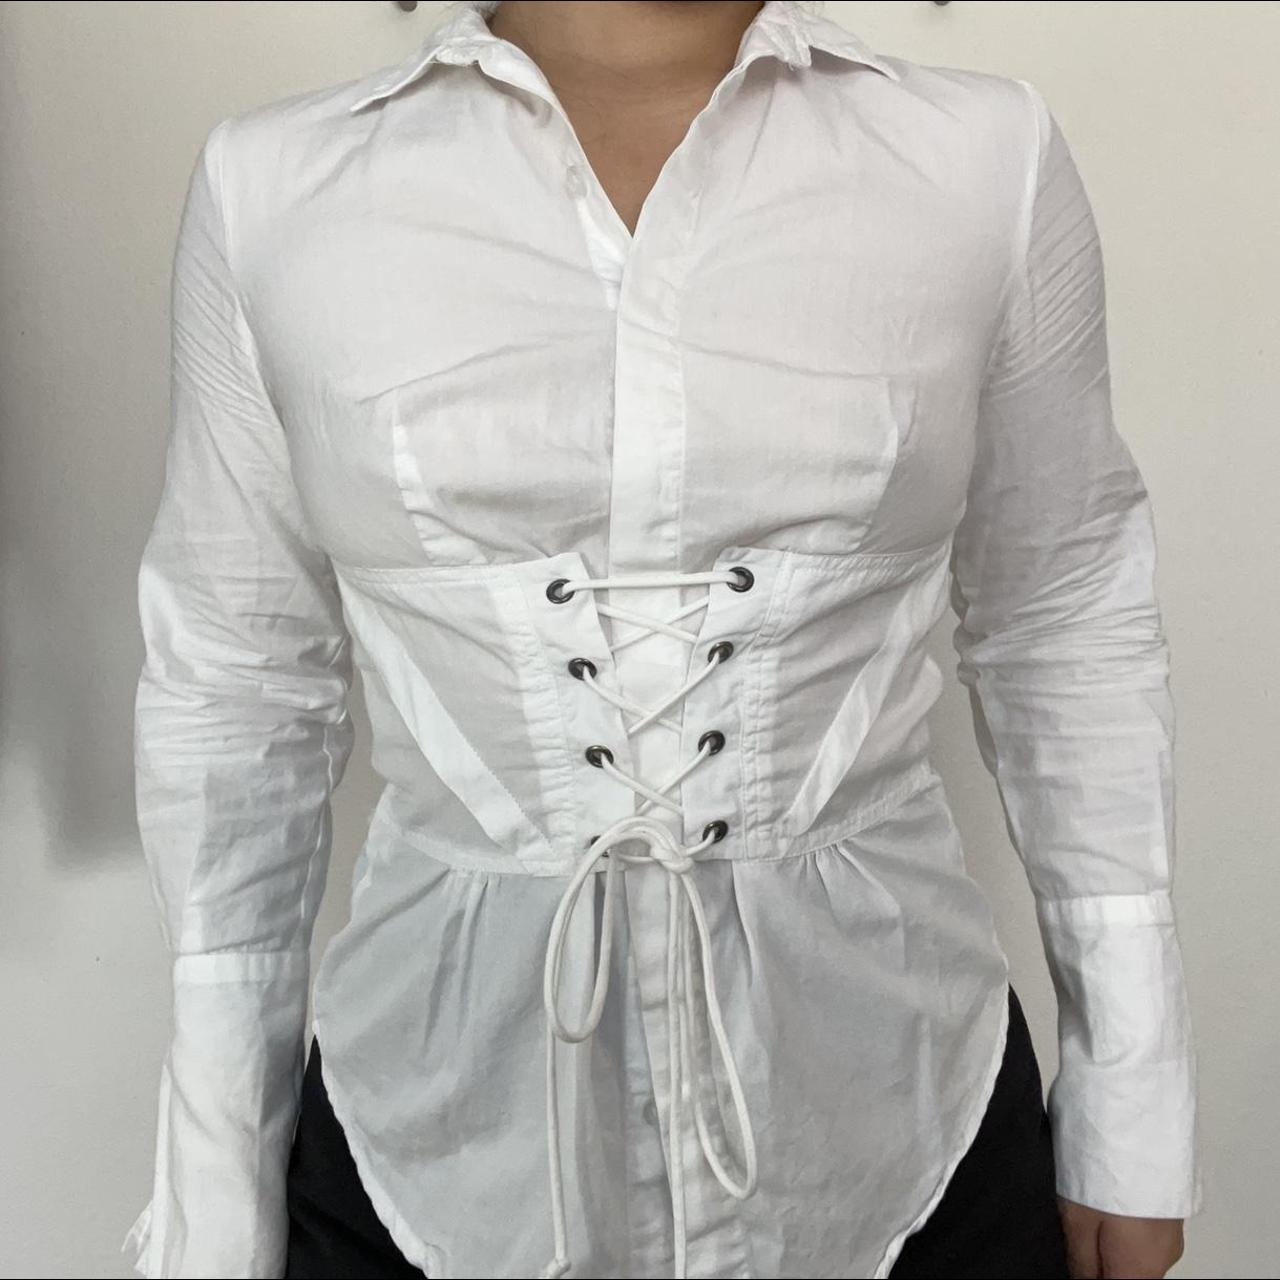 Product Image 2 - Corset Button Up Top
Corset style